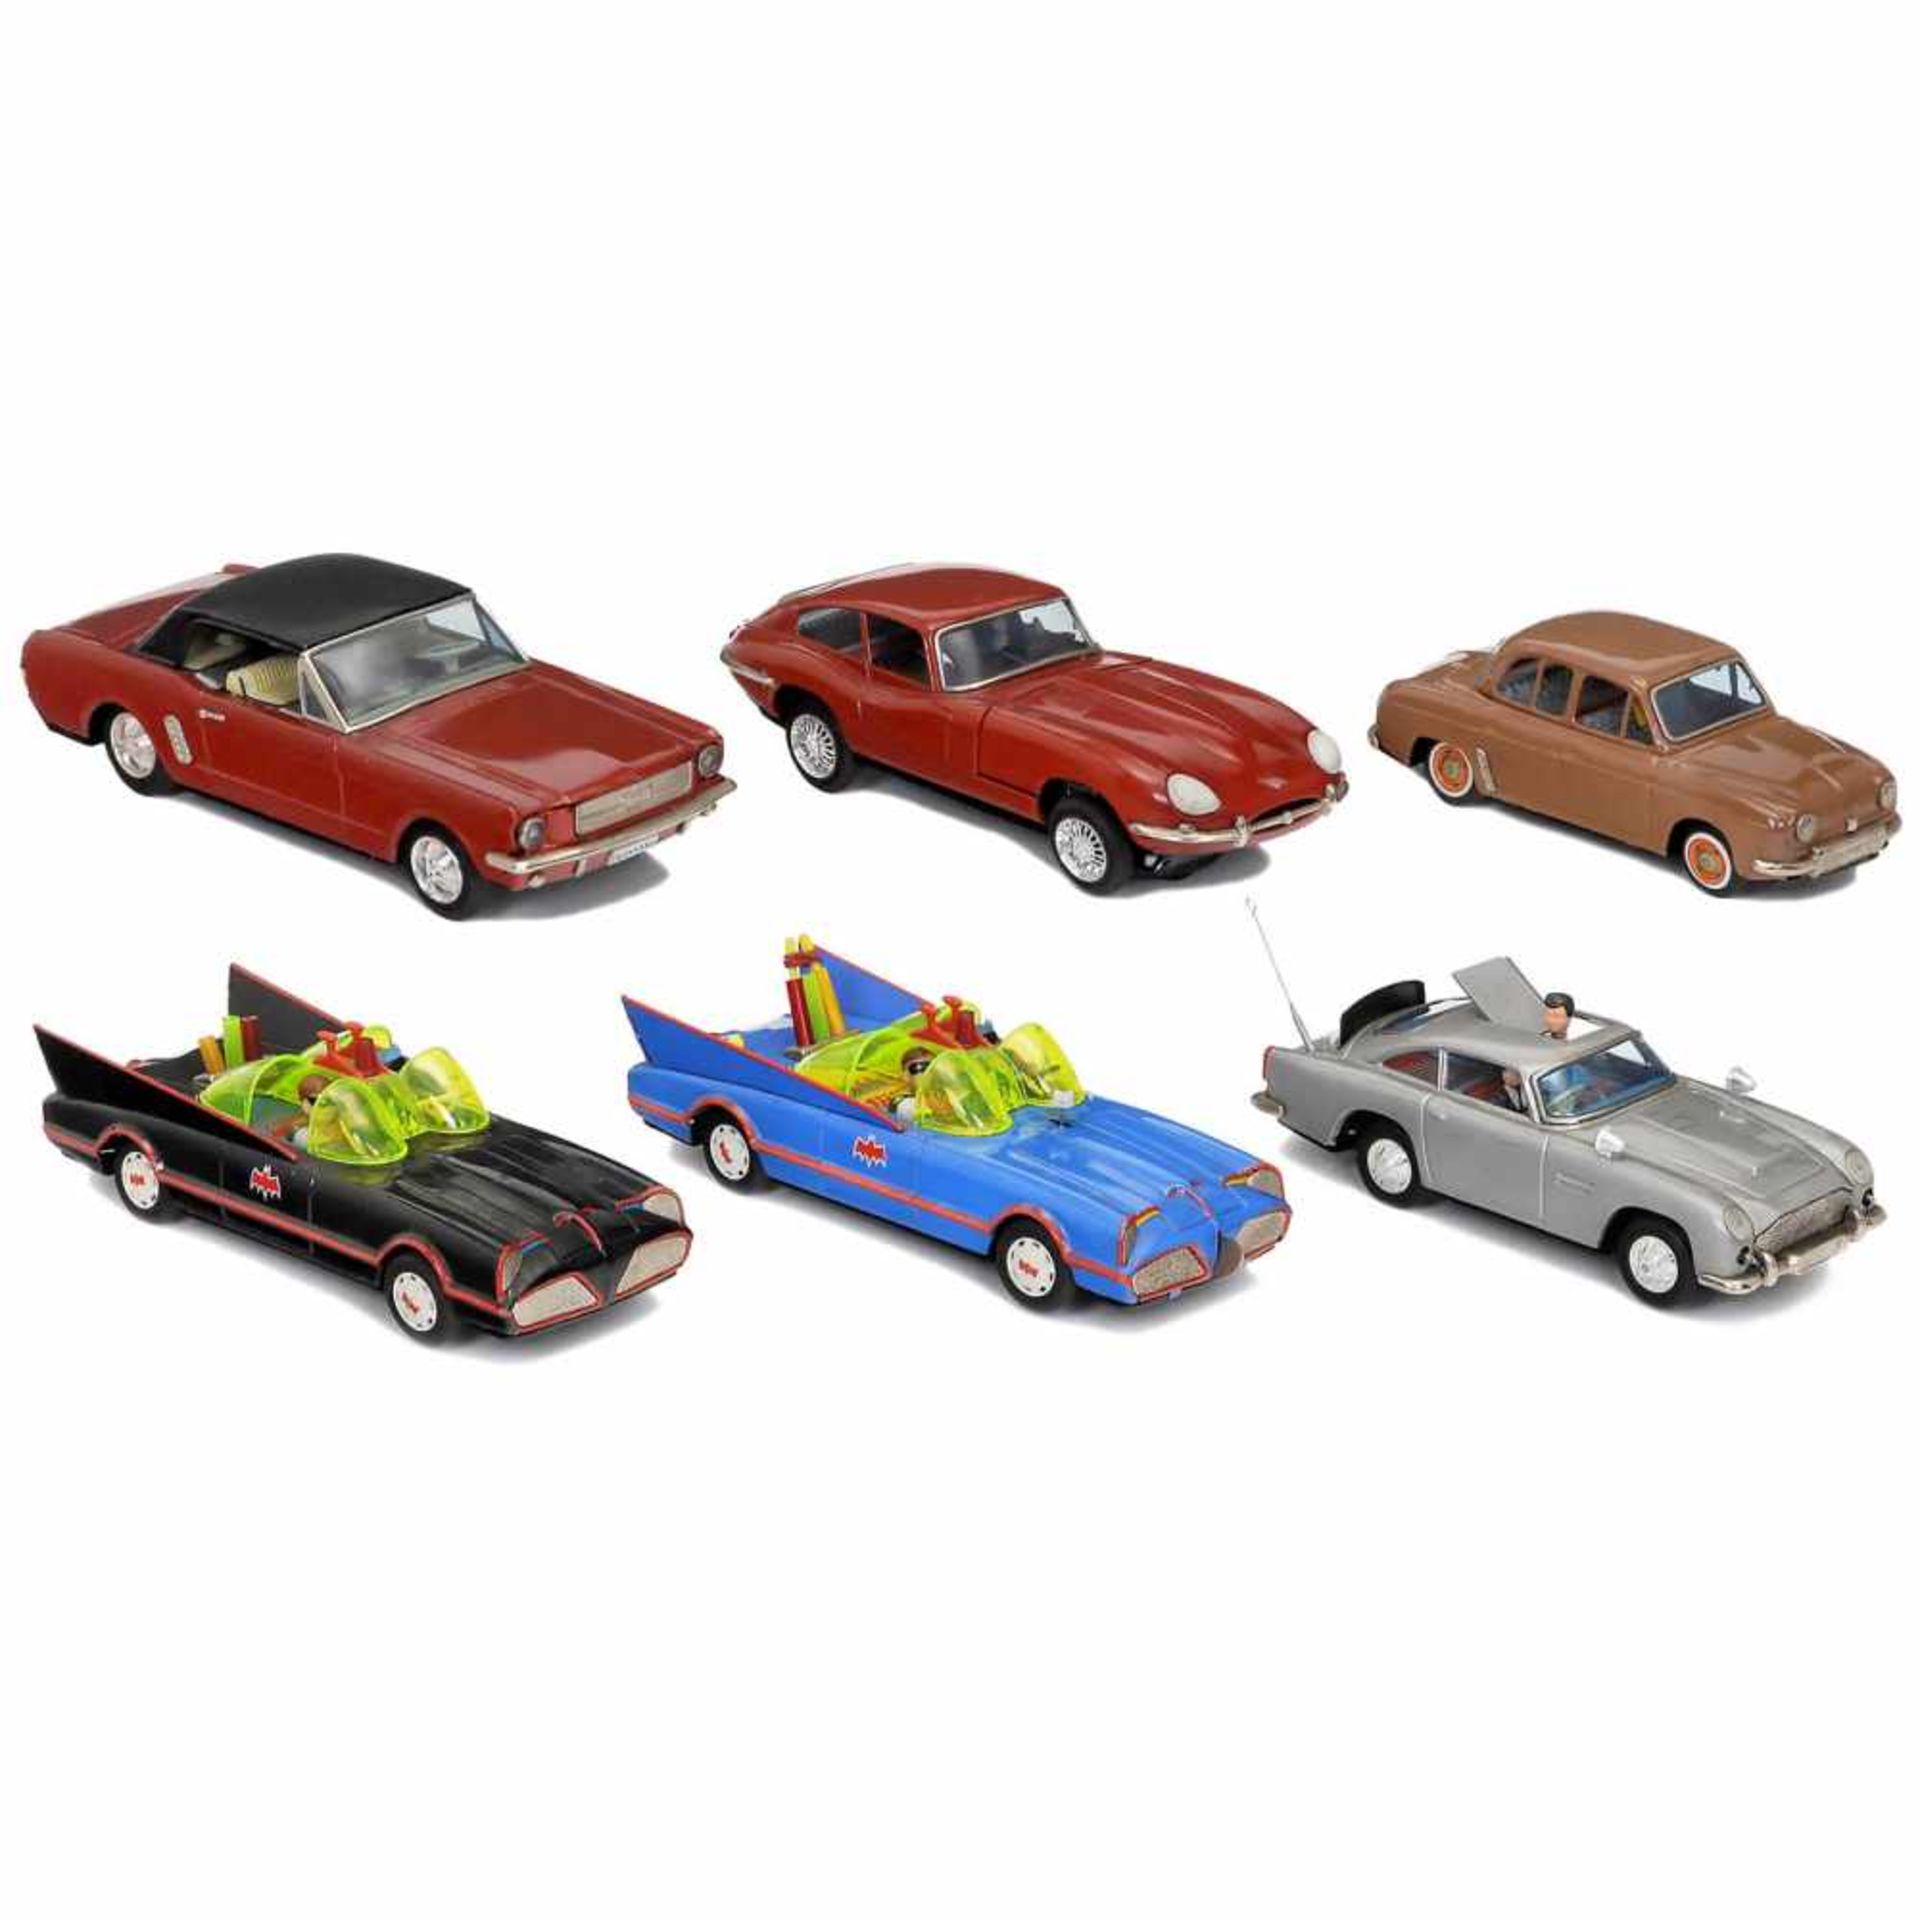 6 Japanese Tin-Toy Cars1) Gama/ASC, Batmobile, battery drive, working, length 11 ¼ in. - 2)